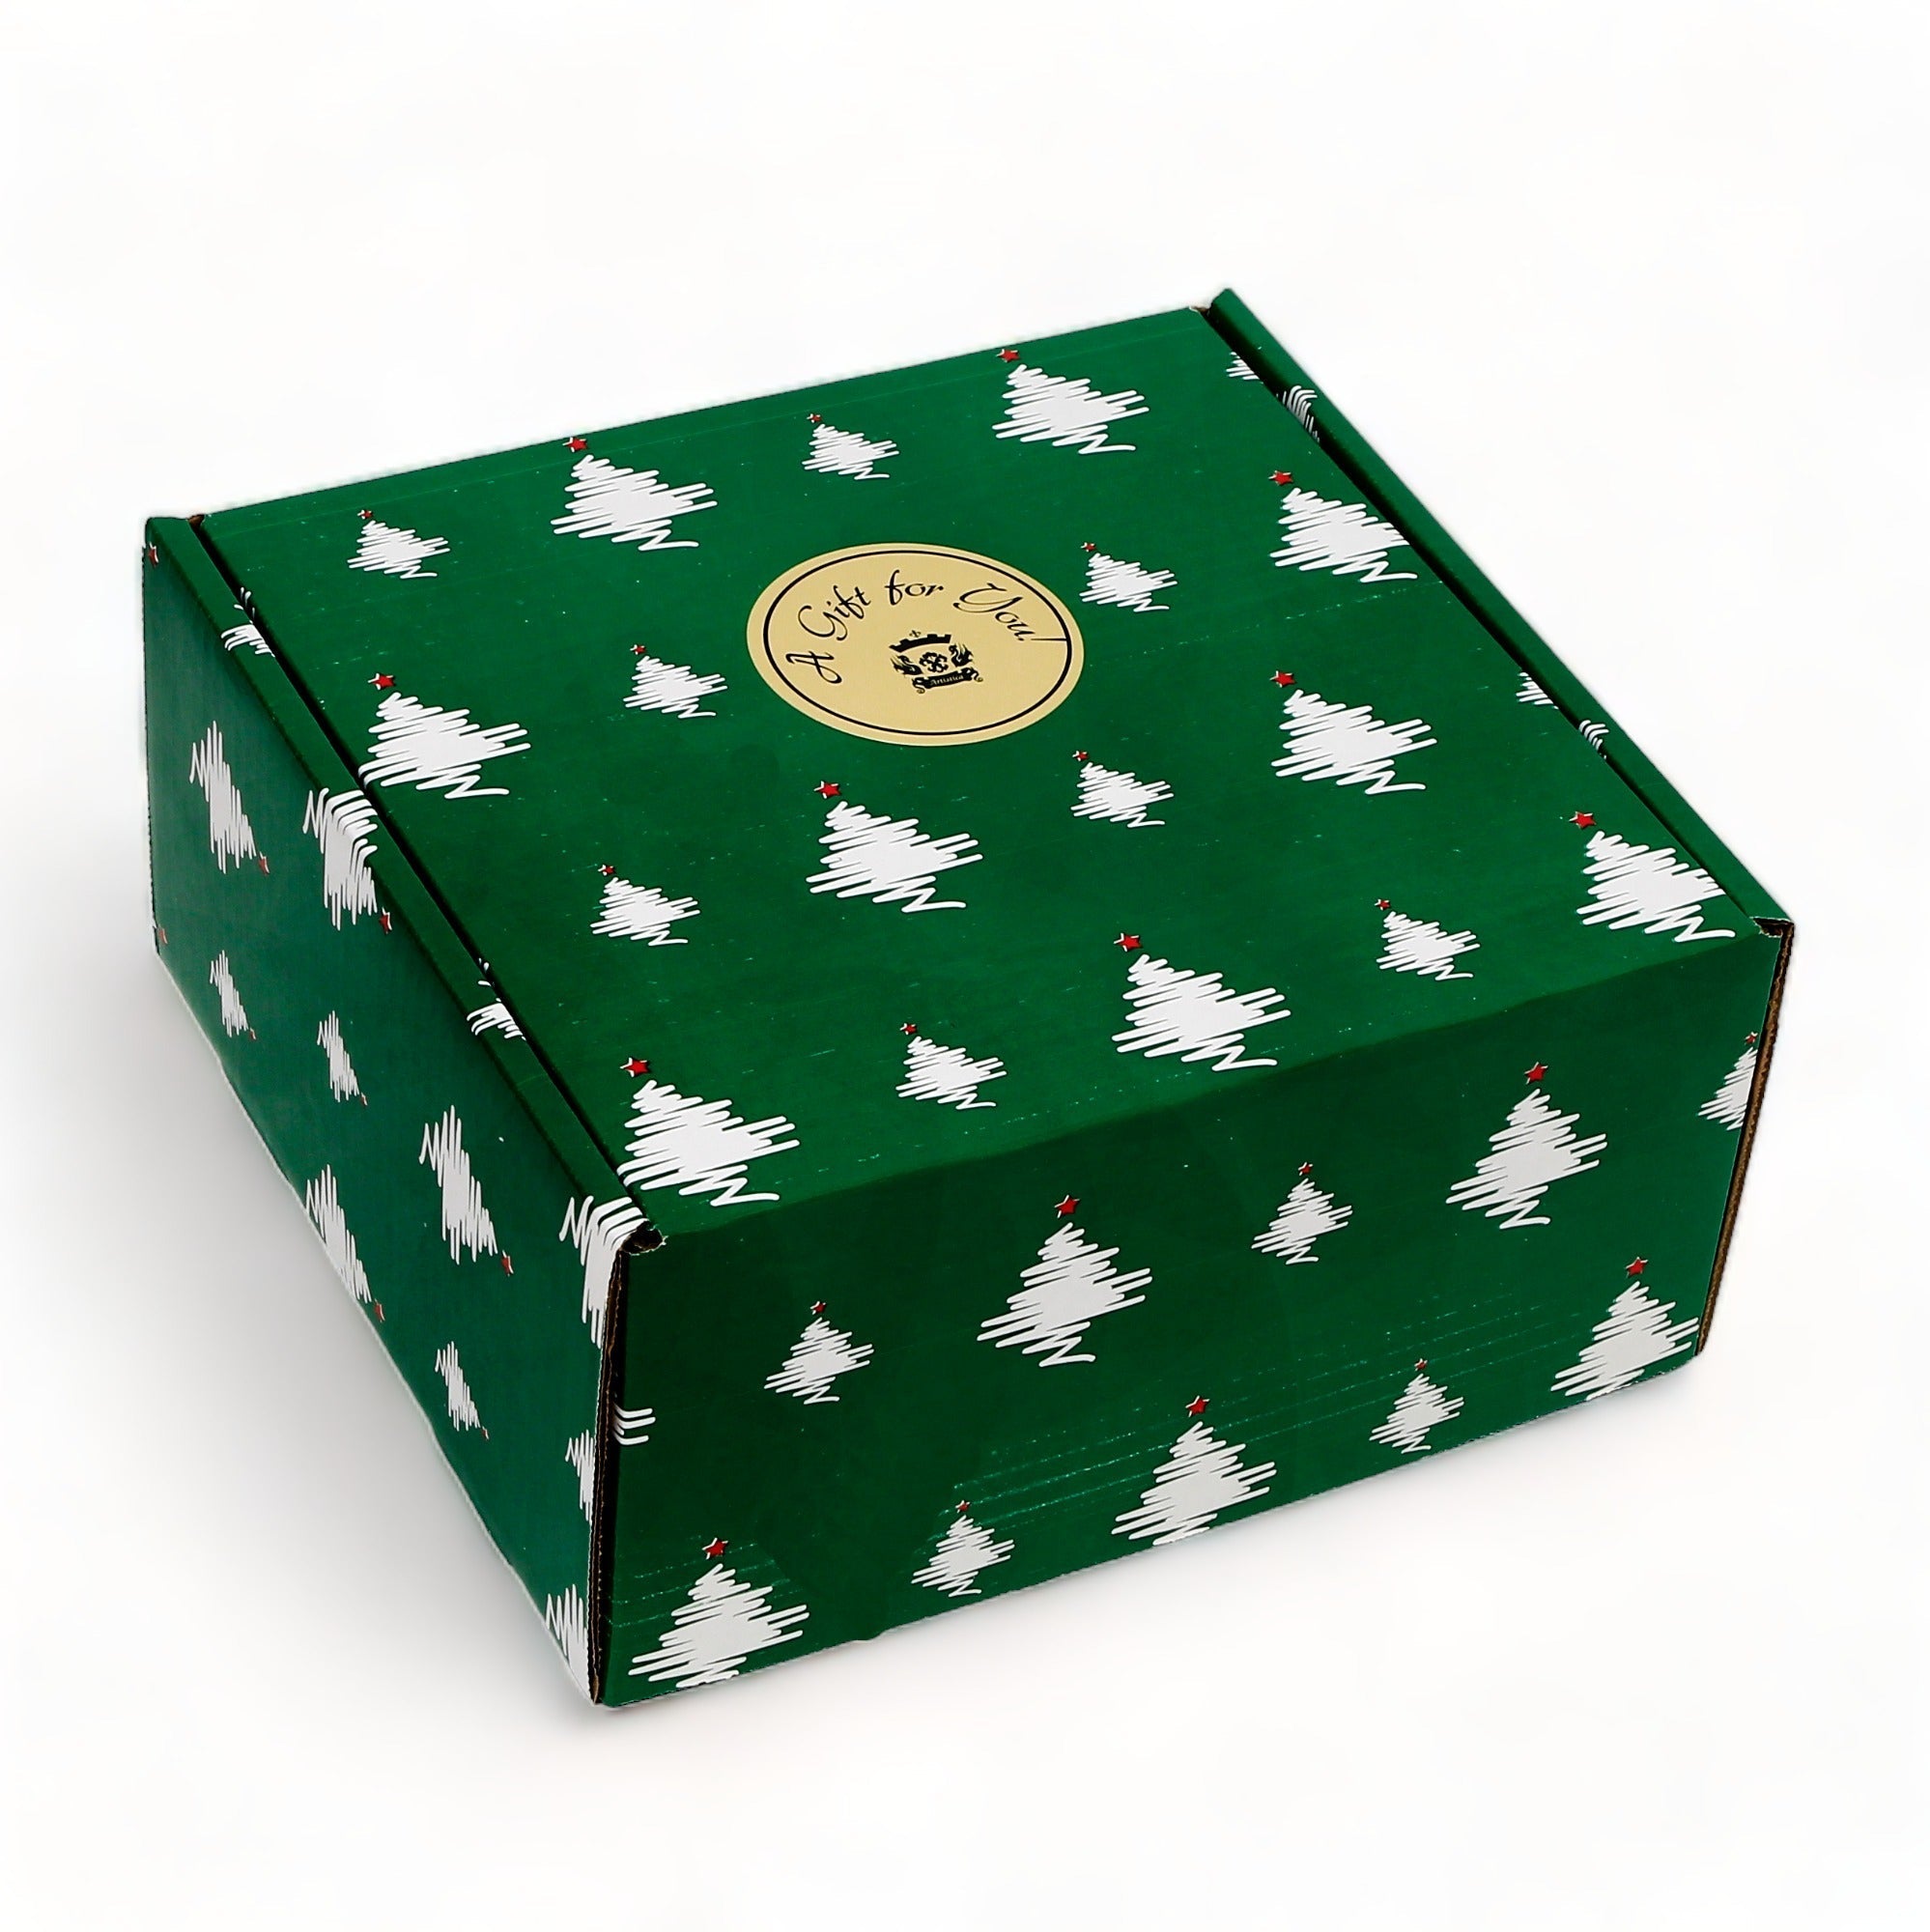 GIFT BOX CHRISTMAS: Green Gift Box with Ricco Deruta Deluxe Salad Plates (Set of 4 pcs)